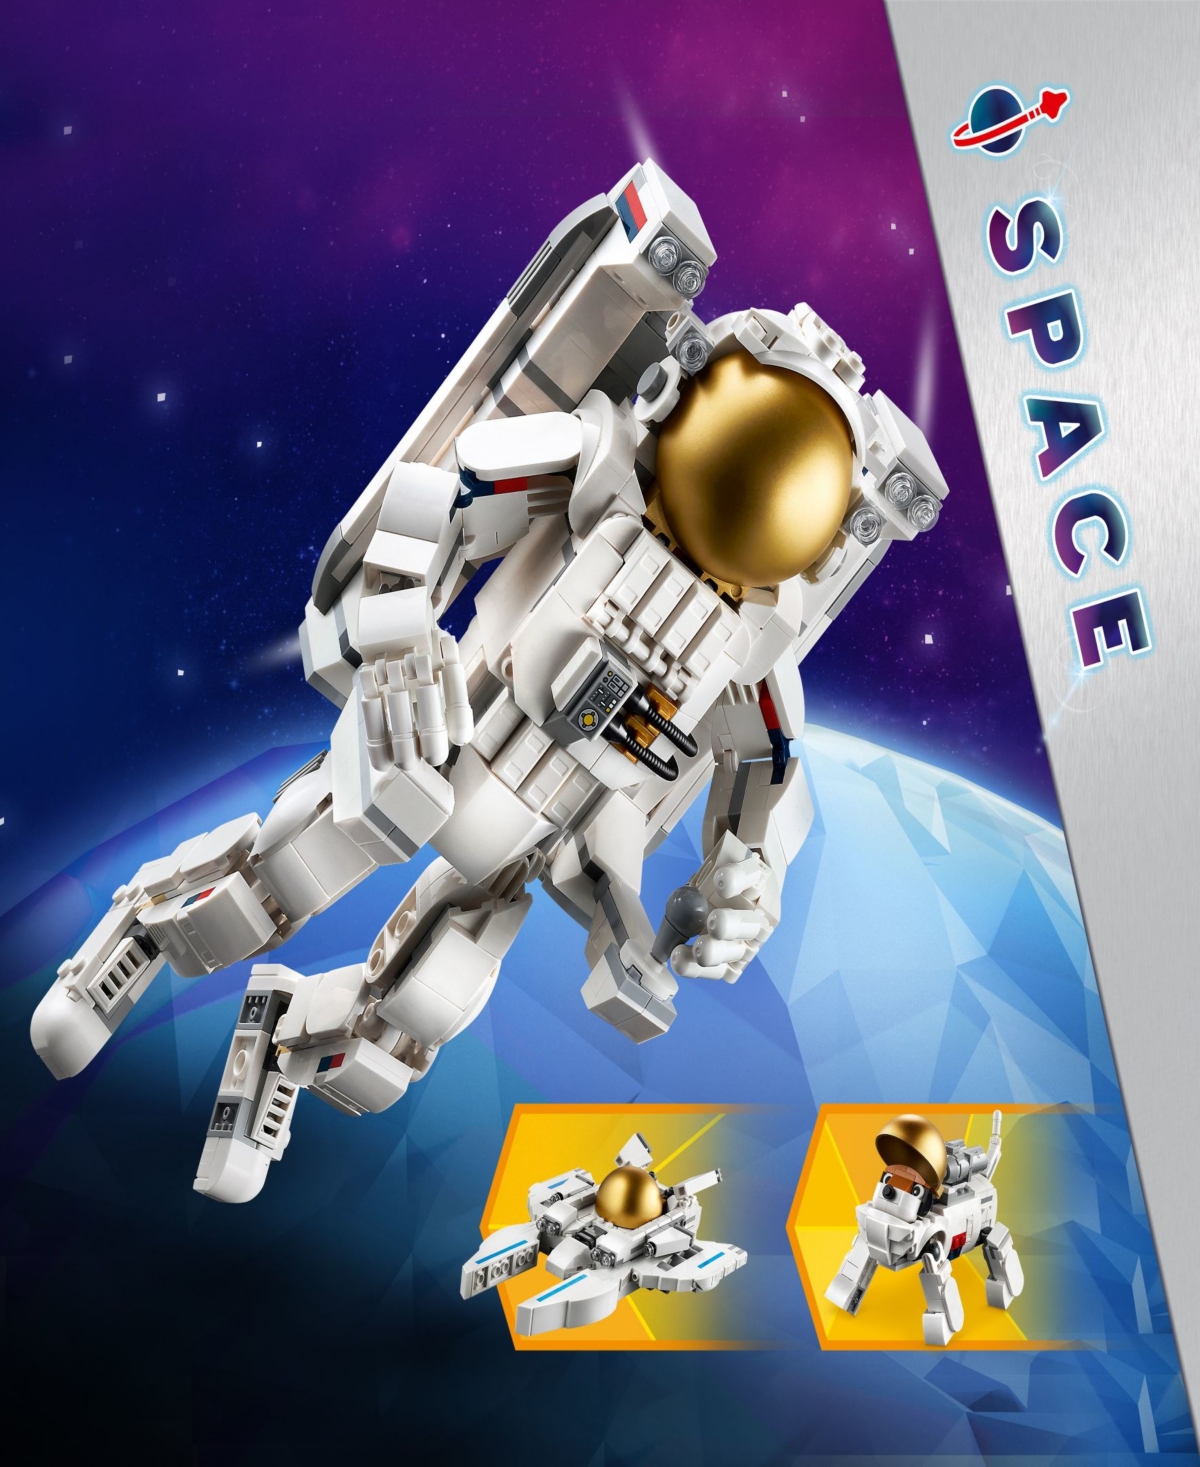 Shop Lego Creator 3 In 1 Space Astronaut Toy Set, Science Toy 31152 In No Color